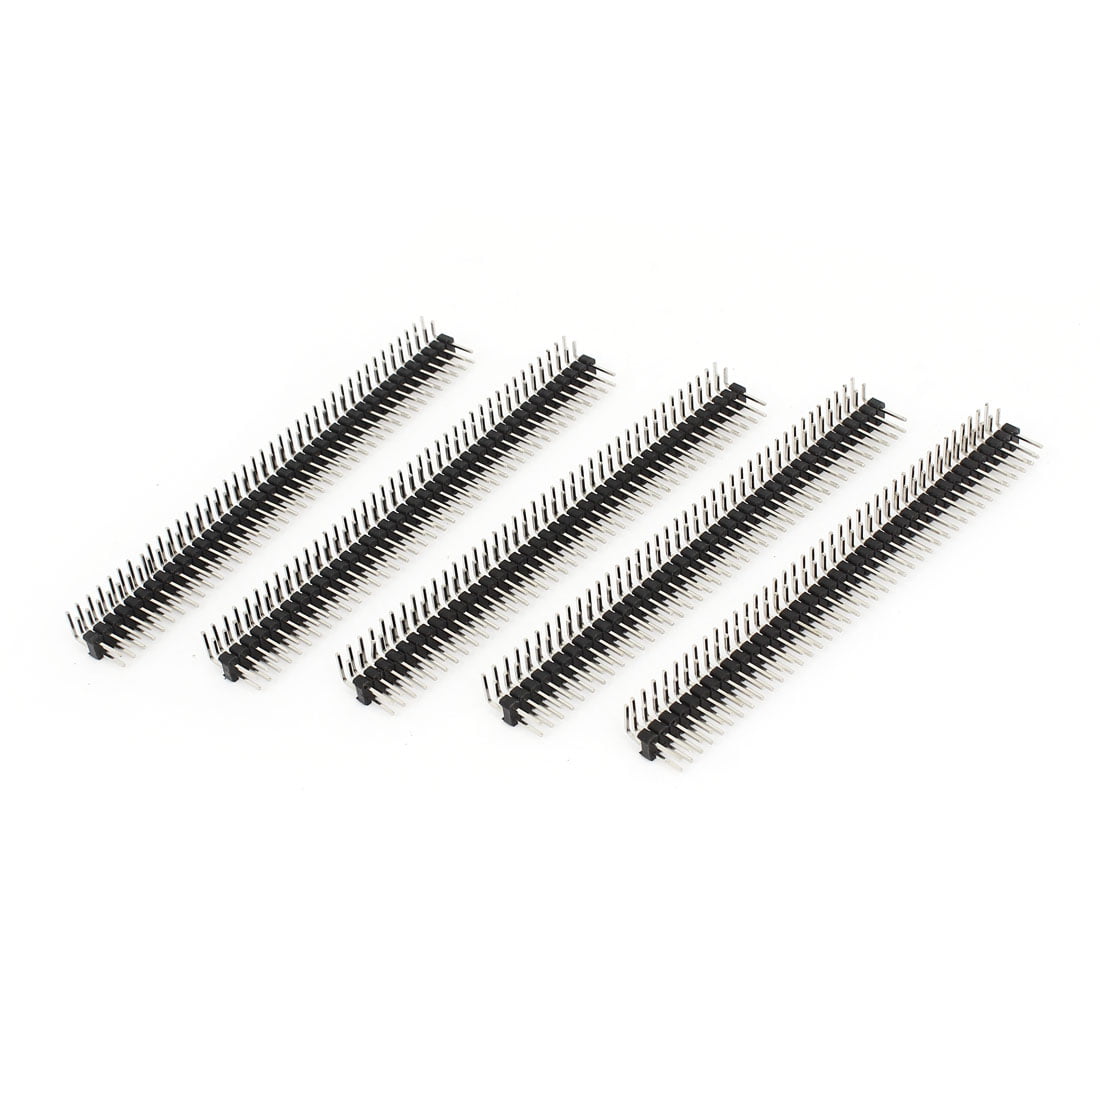 5Pcs Pitch 2.54mm 2x40 Pin Right Angle Male Double Row Pin Header Strip 